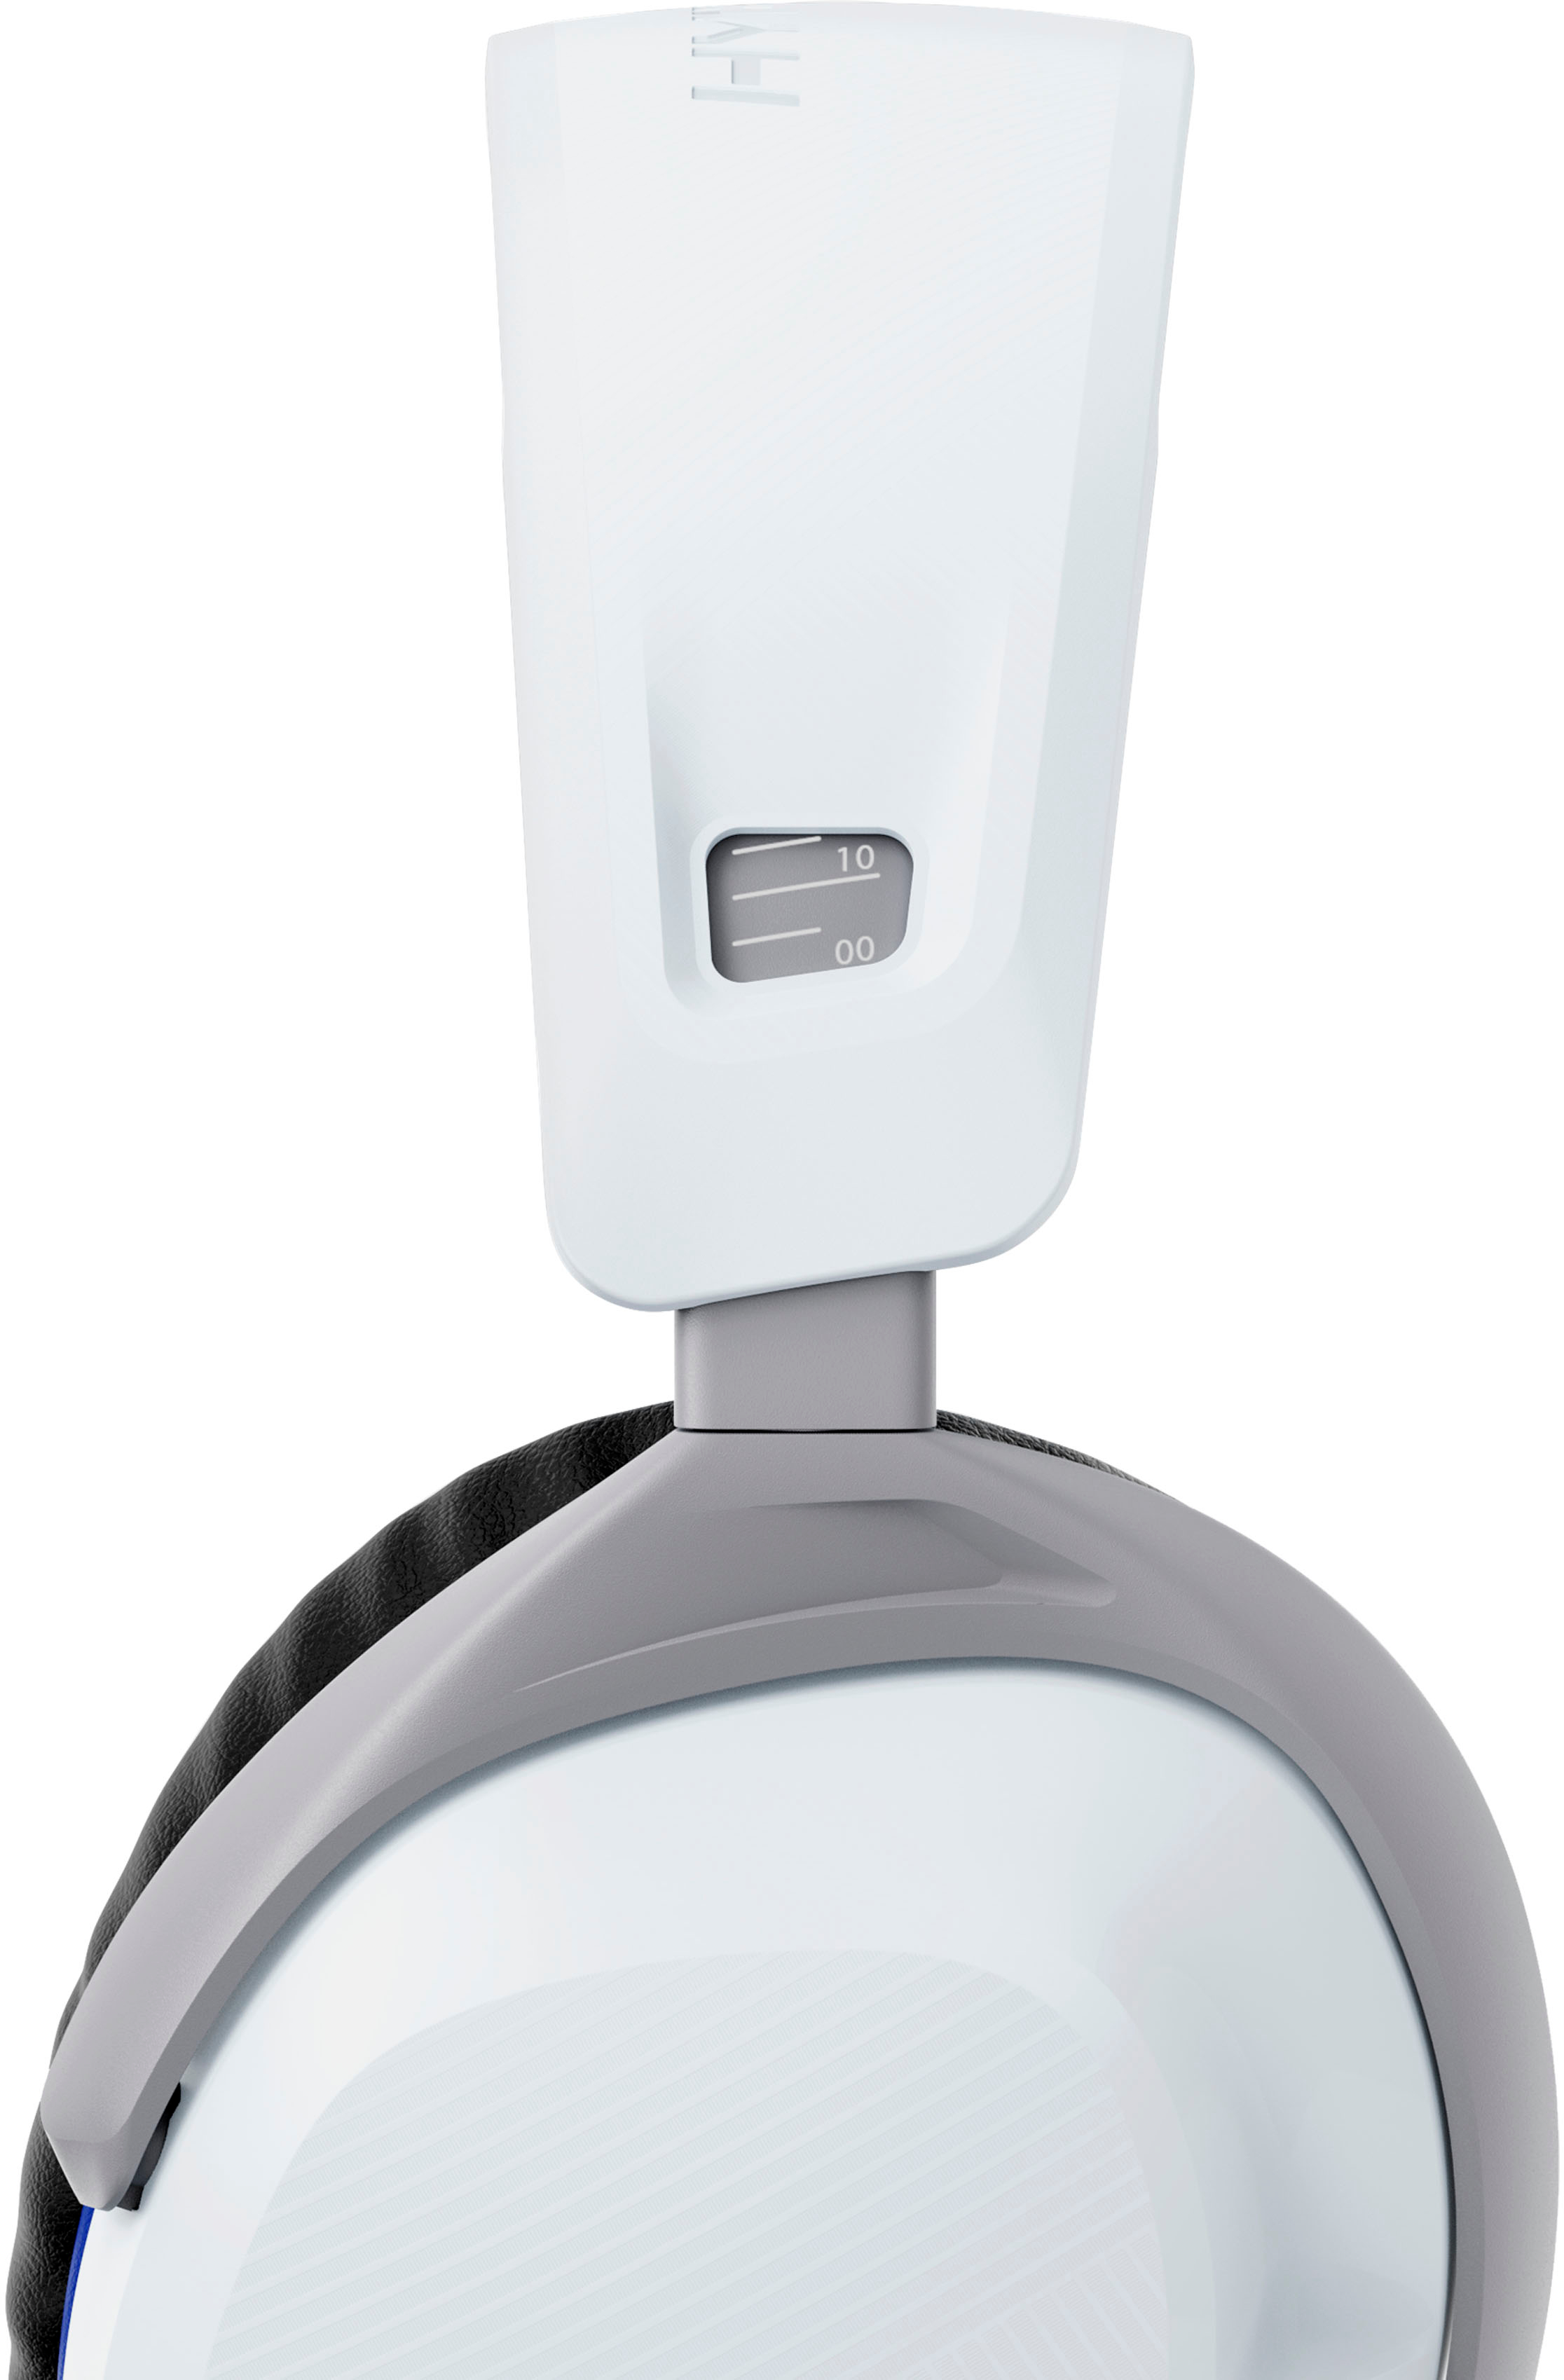 HyperX Cloud Stinger 2 Core - Gaming Headset for Playstation, Lightweight  Over-Ear Headset with mic, Swivel-to-Mute Function, 40mm Drivers - White